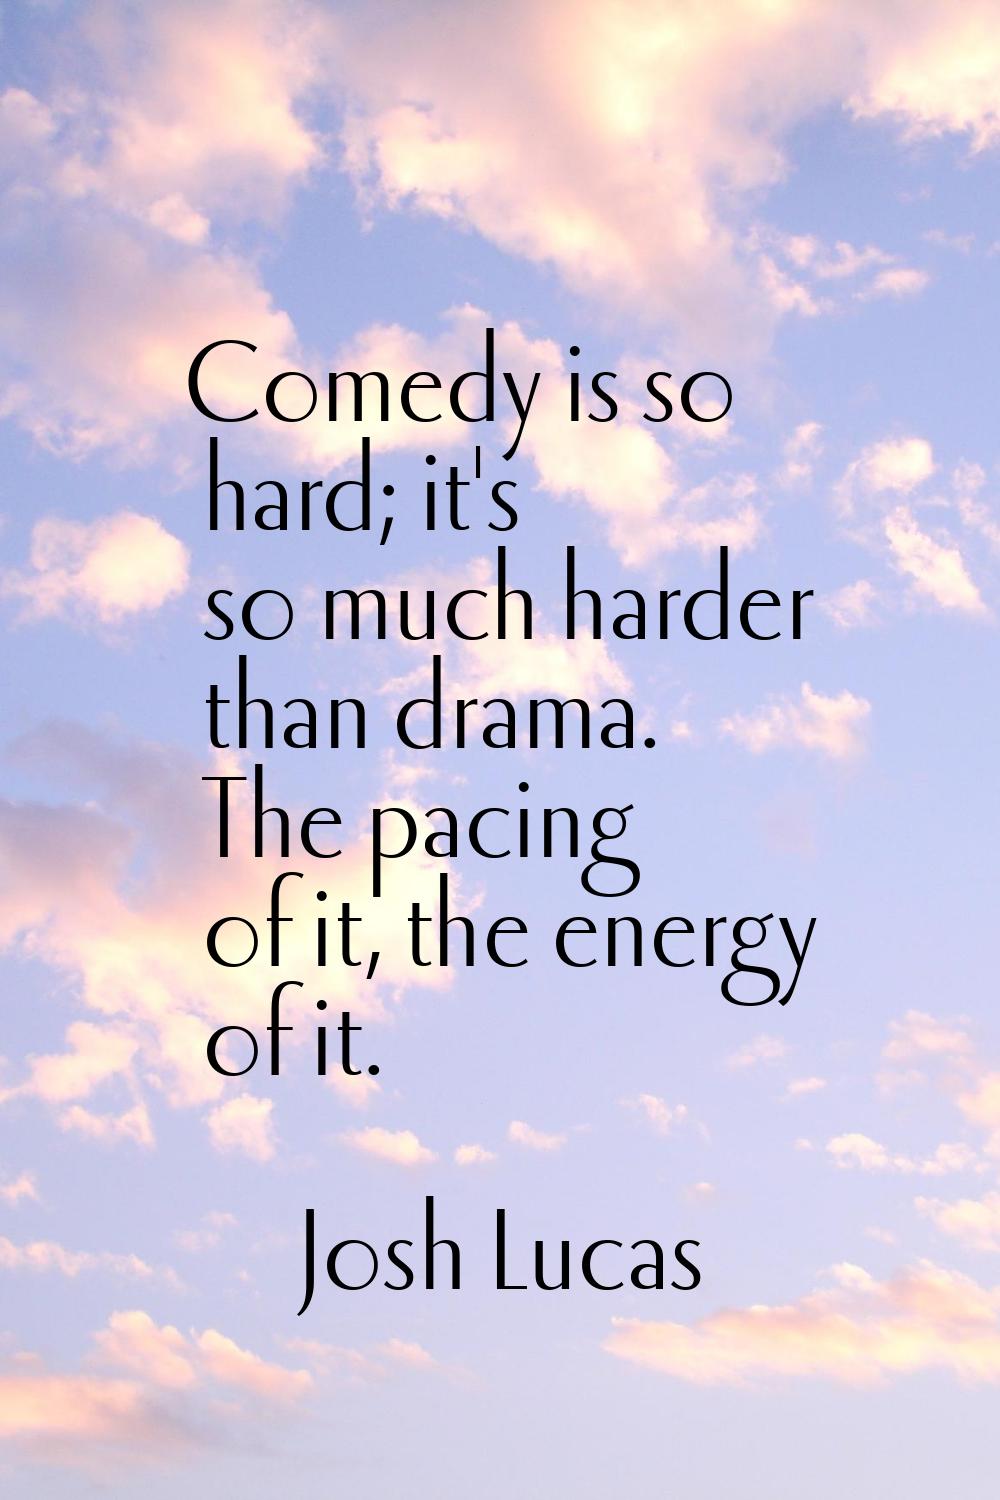 Comedy is so hard; it's so much harder than drama. The pacing of it, the energy of it.